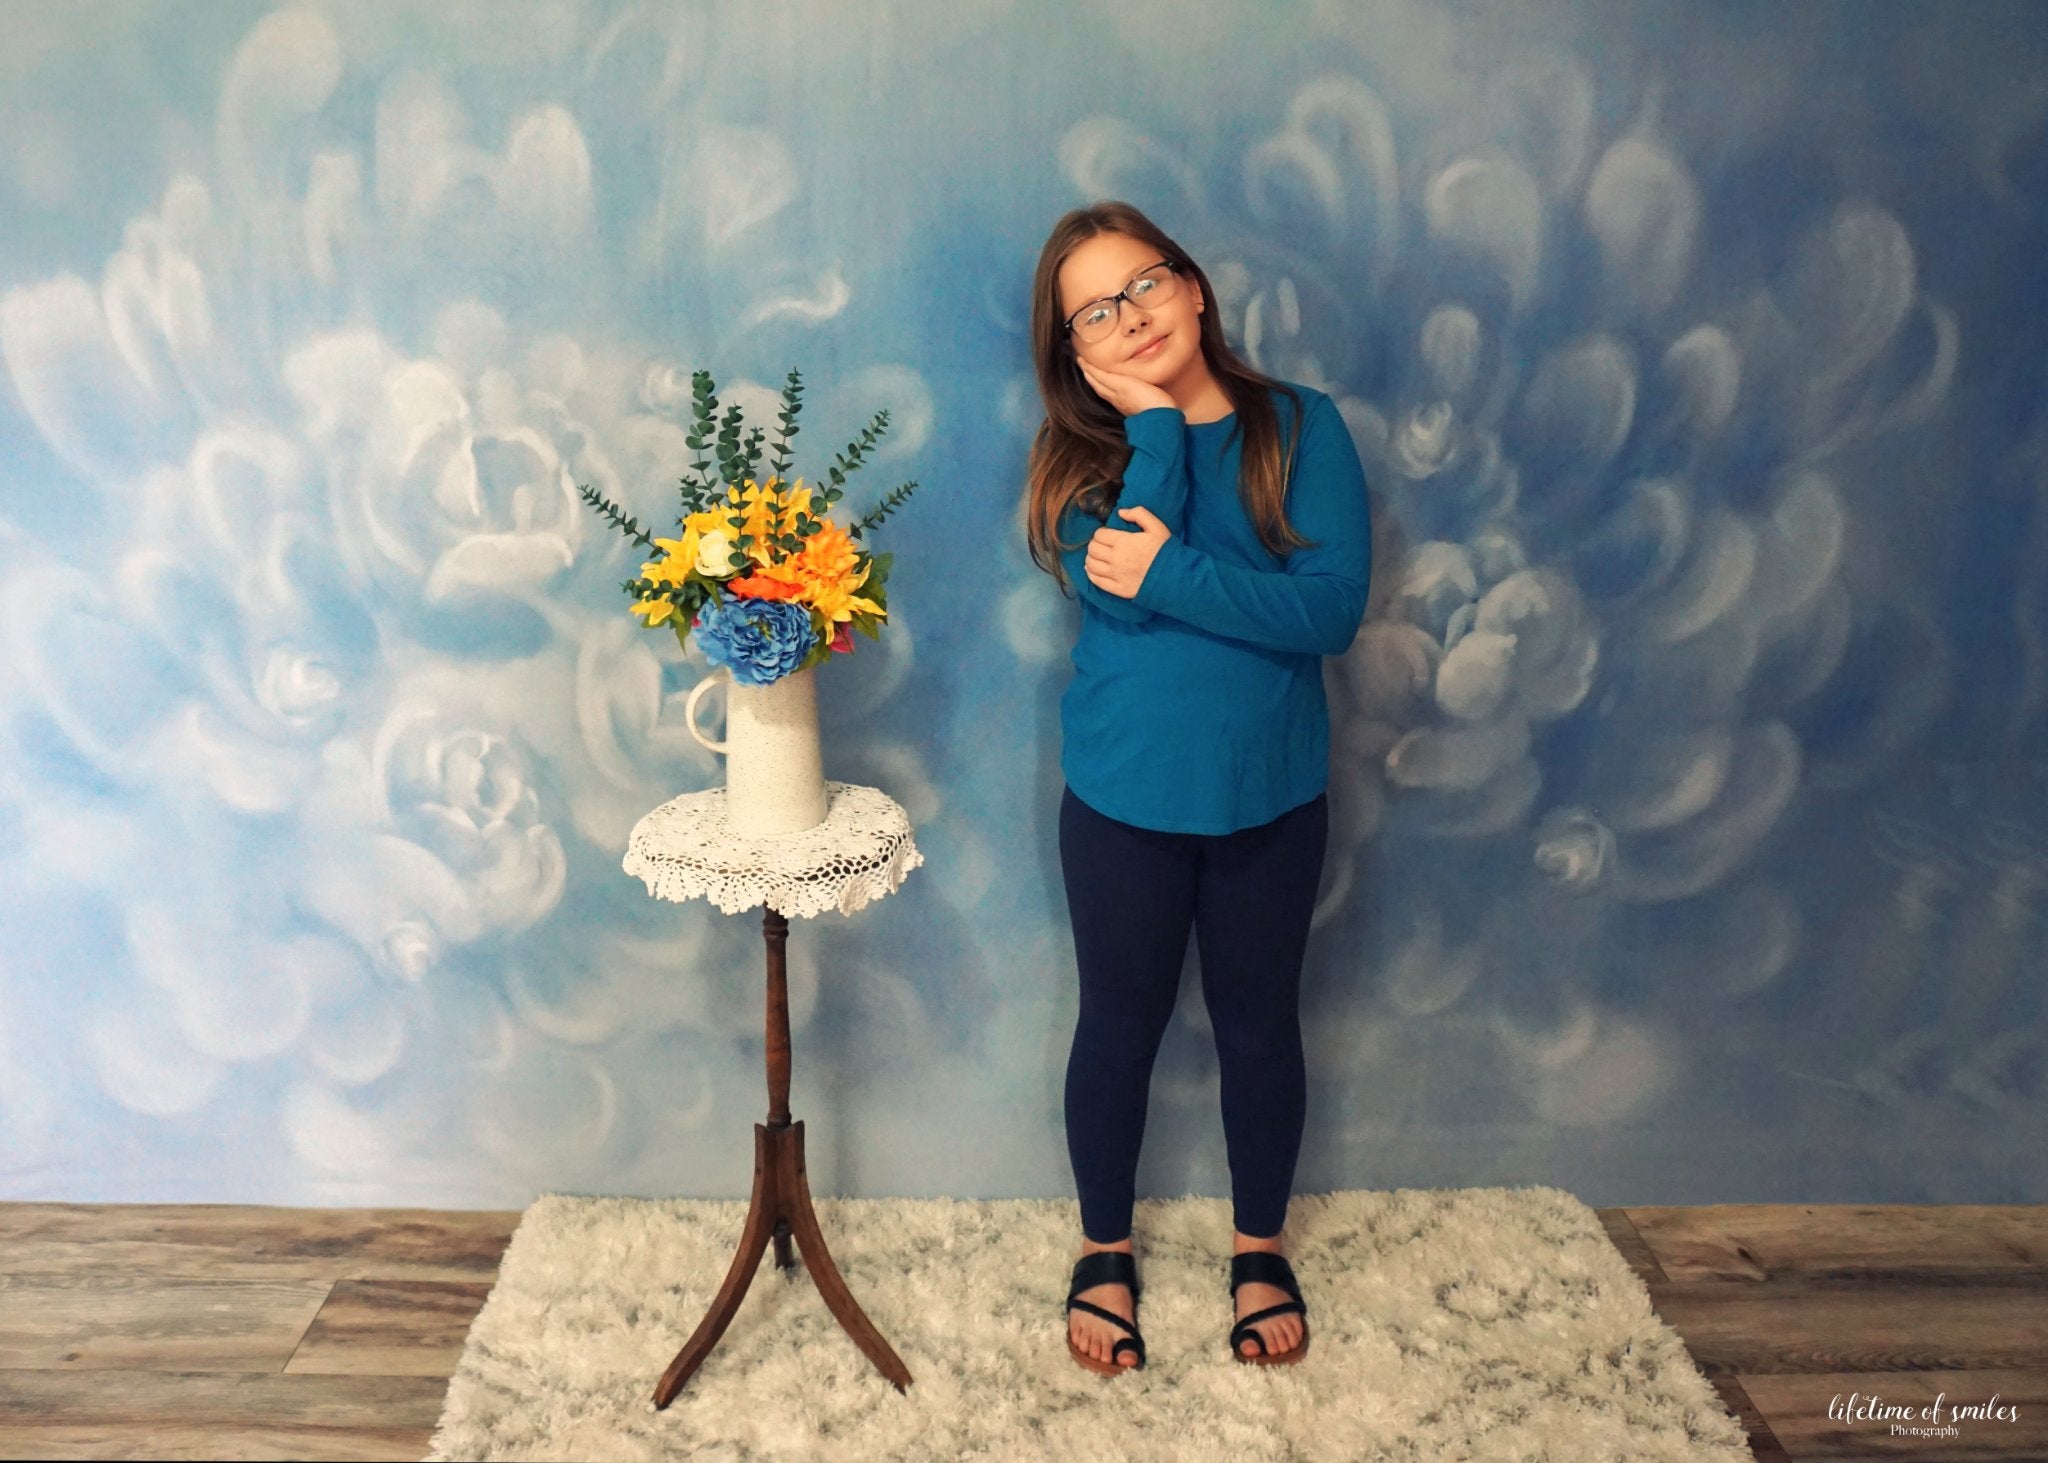 Kate Fine Art Gray Blue Florals Texture Backdrop Designed by GQ